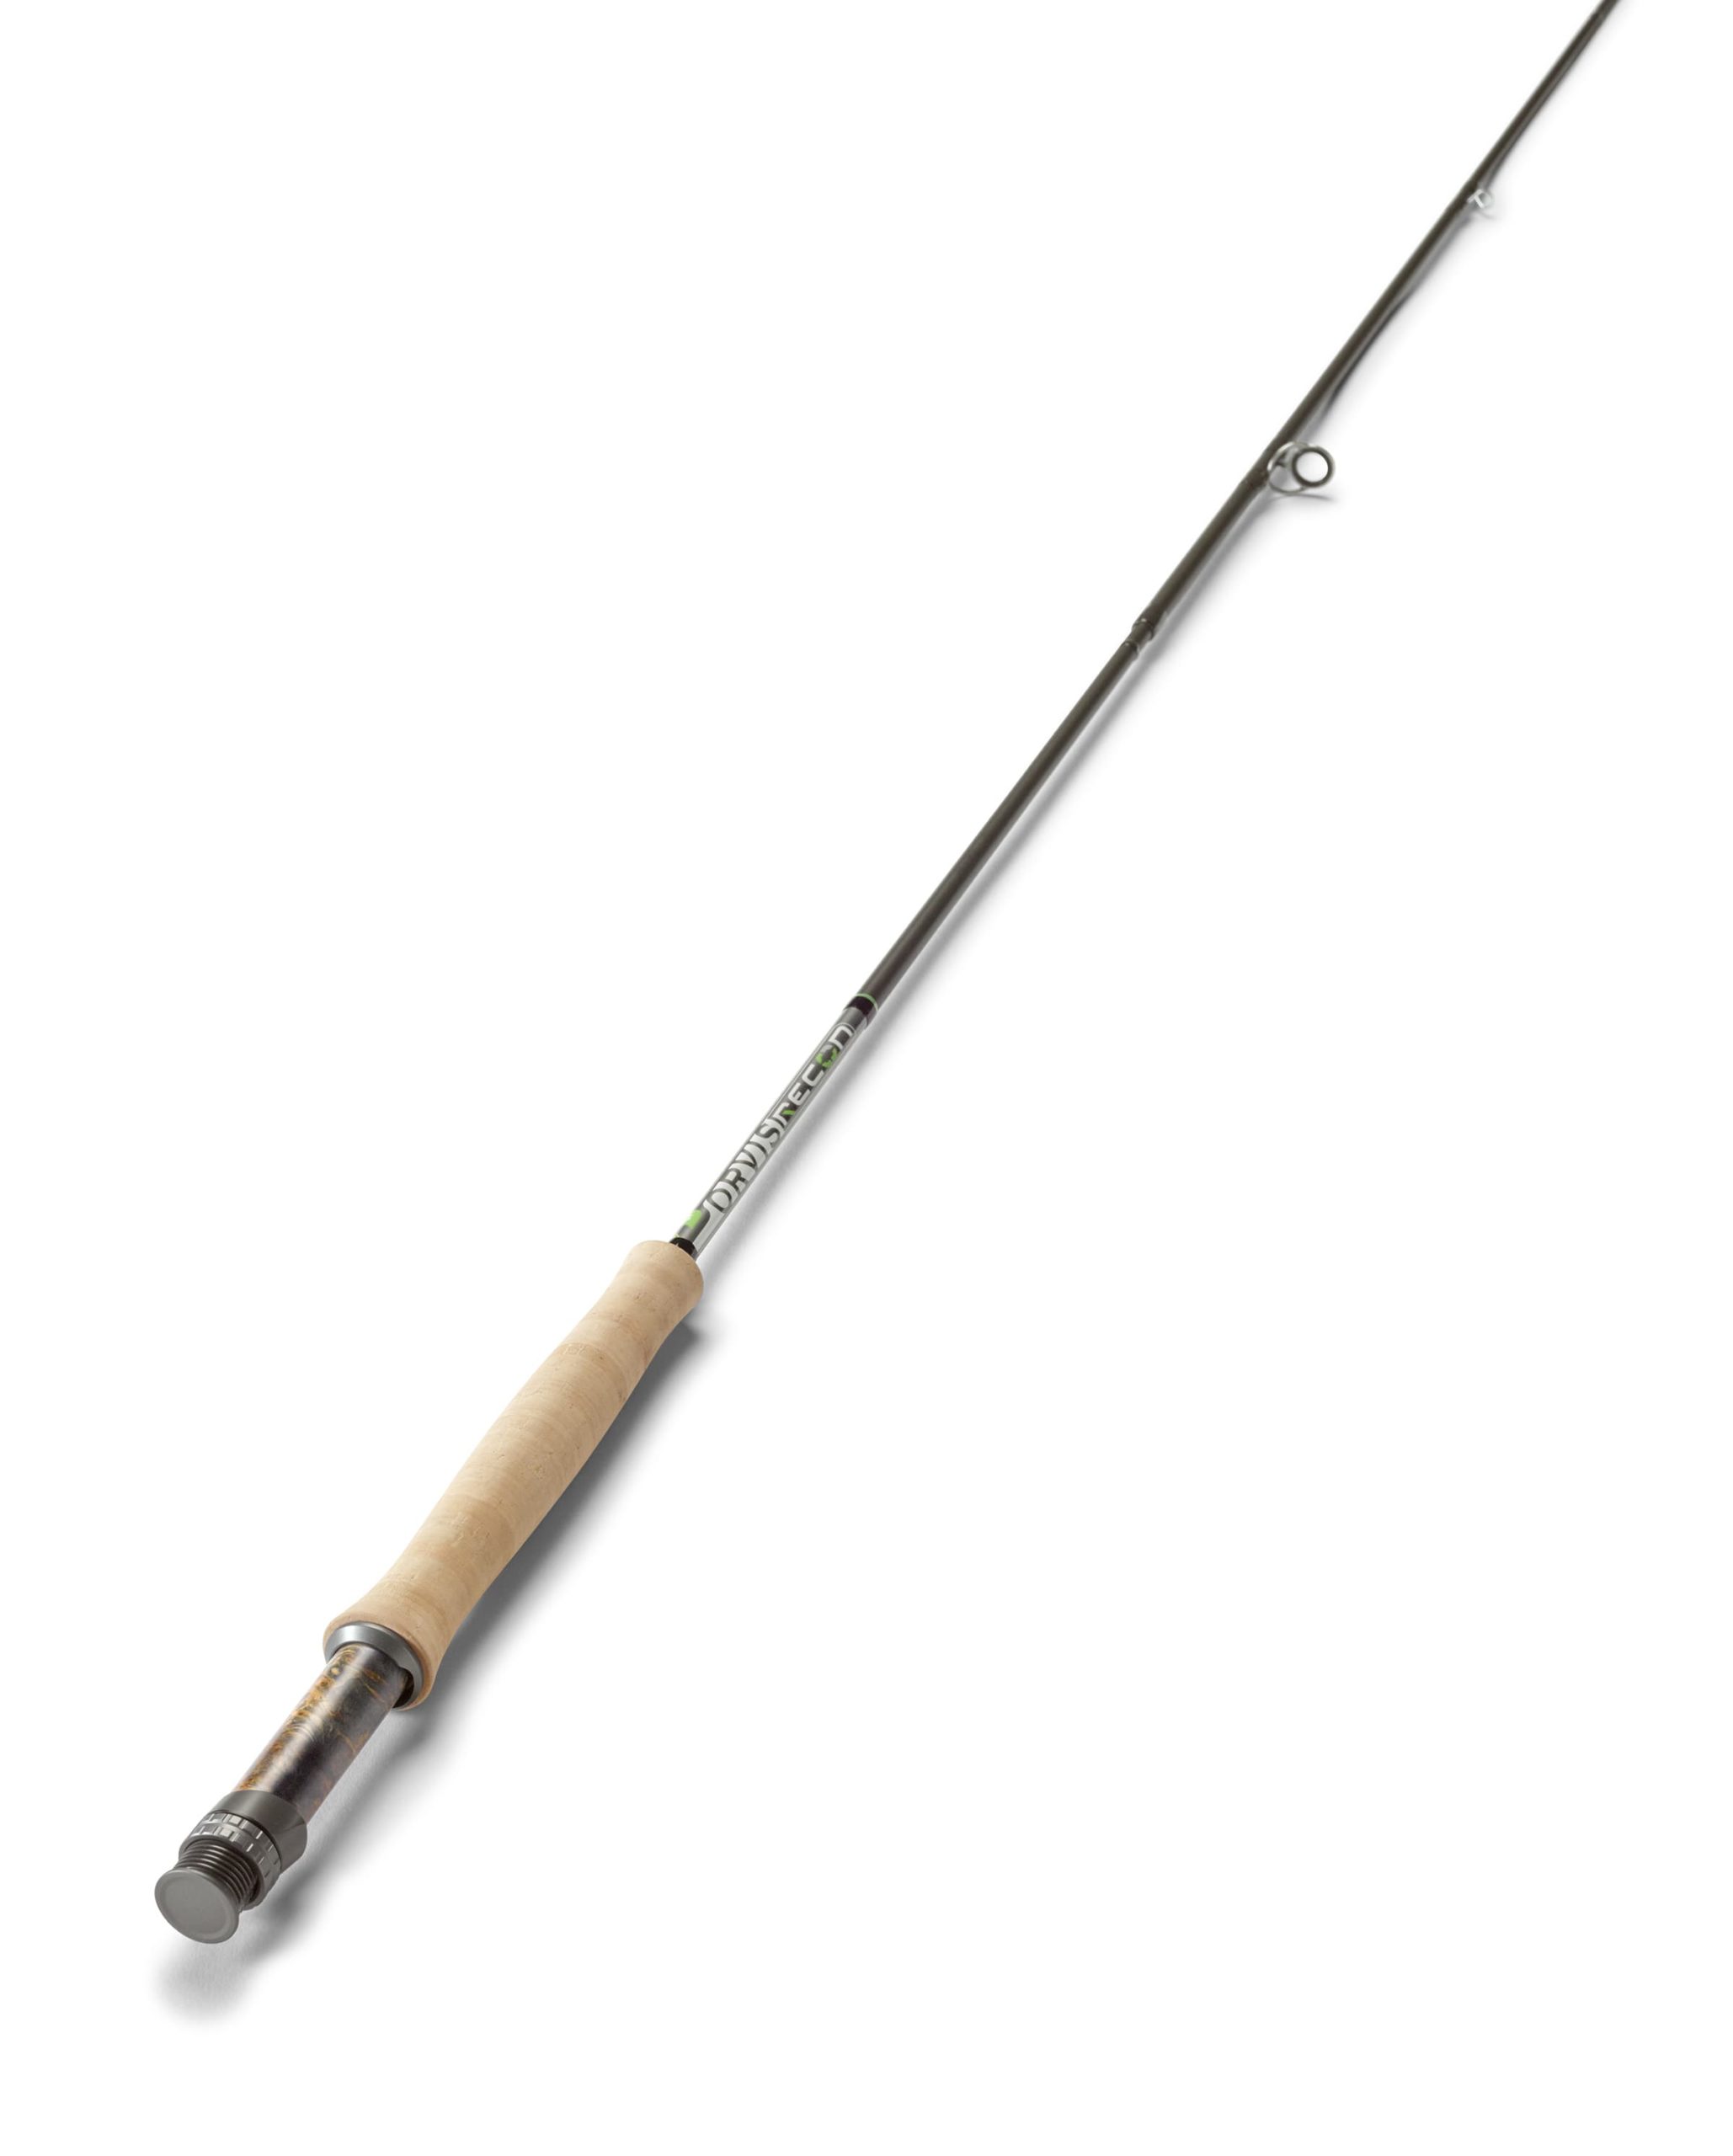 Orvis Recon Fly Rod - The Bent Rod